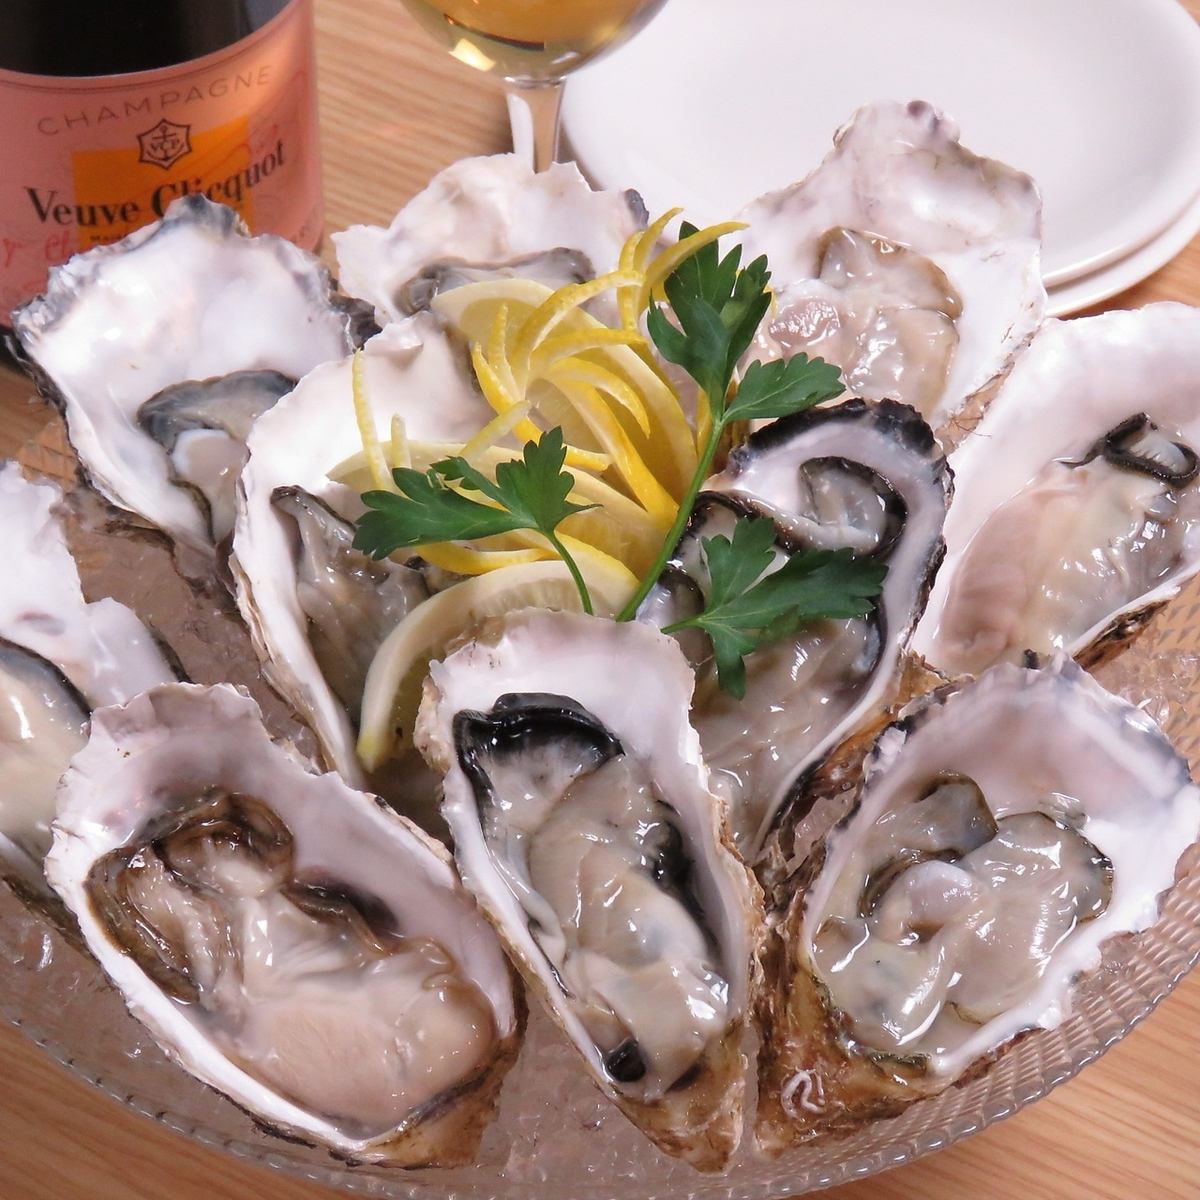 [5 minutes walk from Shinjuku Station] A hidden Italian bar where you can enjoy carefully selected oysters, Italian food, and alcohol